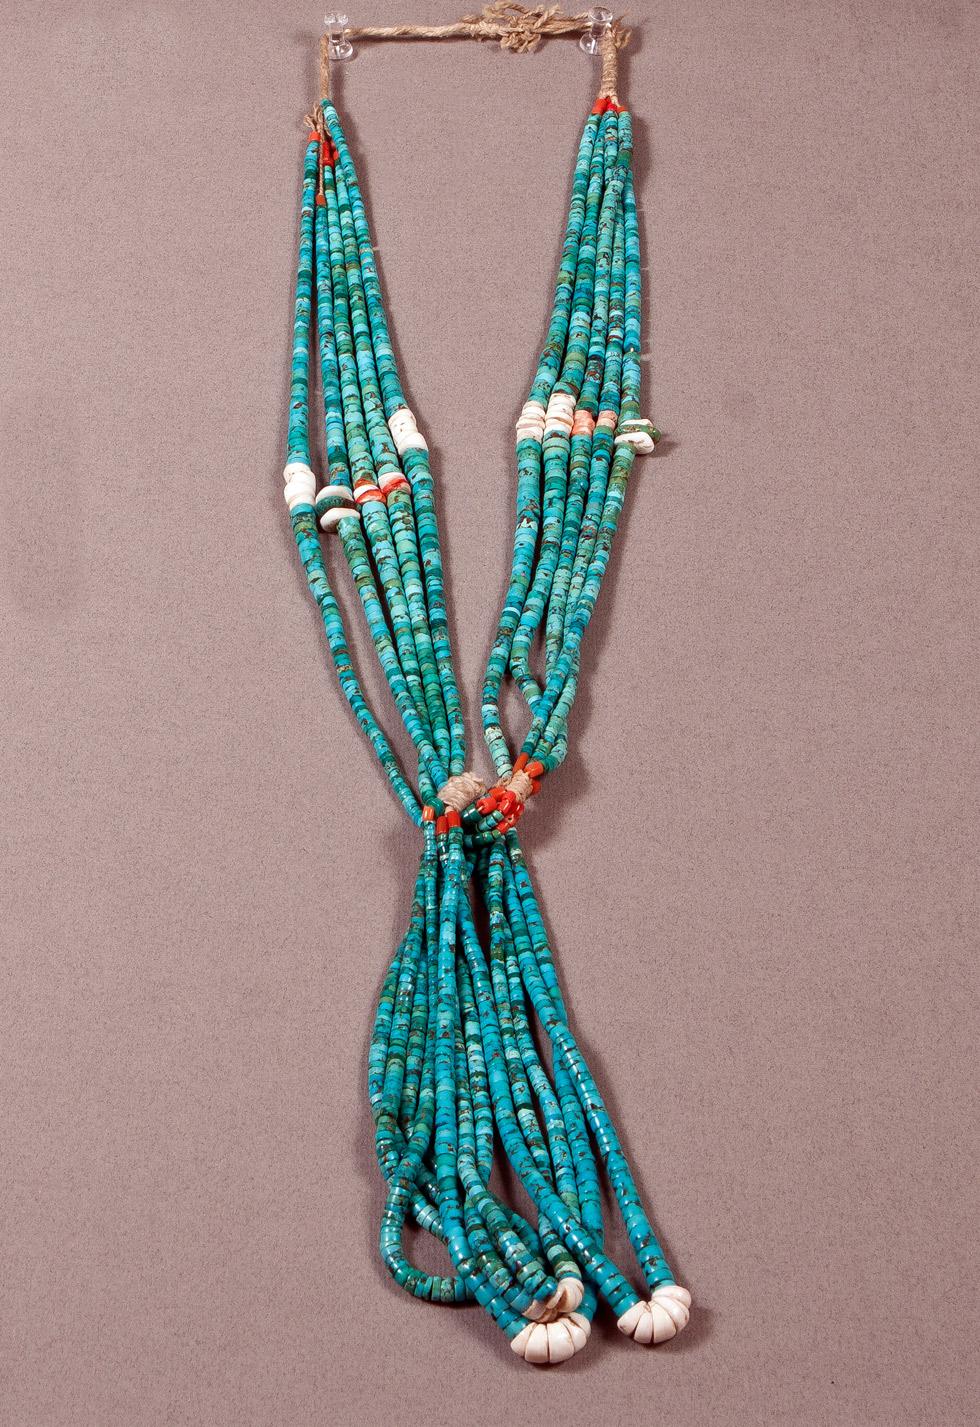 Turquoise Disk Necklace, date unknown, C.A. Wir, 89.016.305. Gift of Edwin L. and Ruth E. Kennedy.